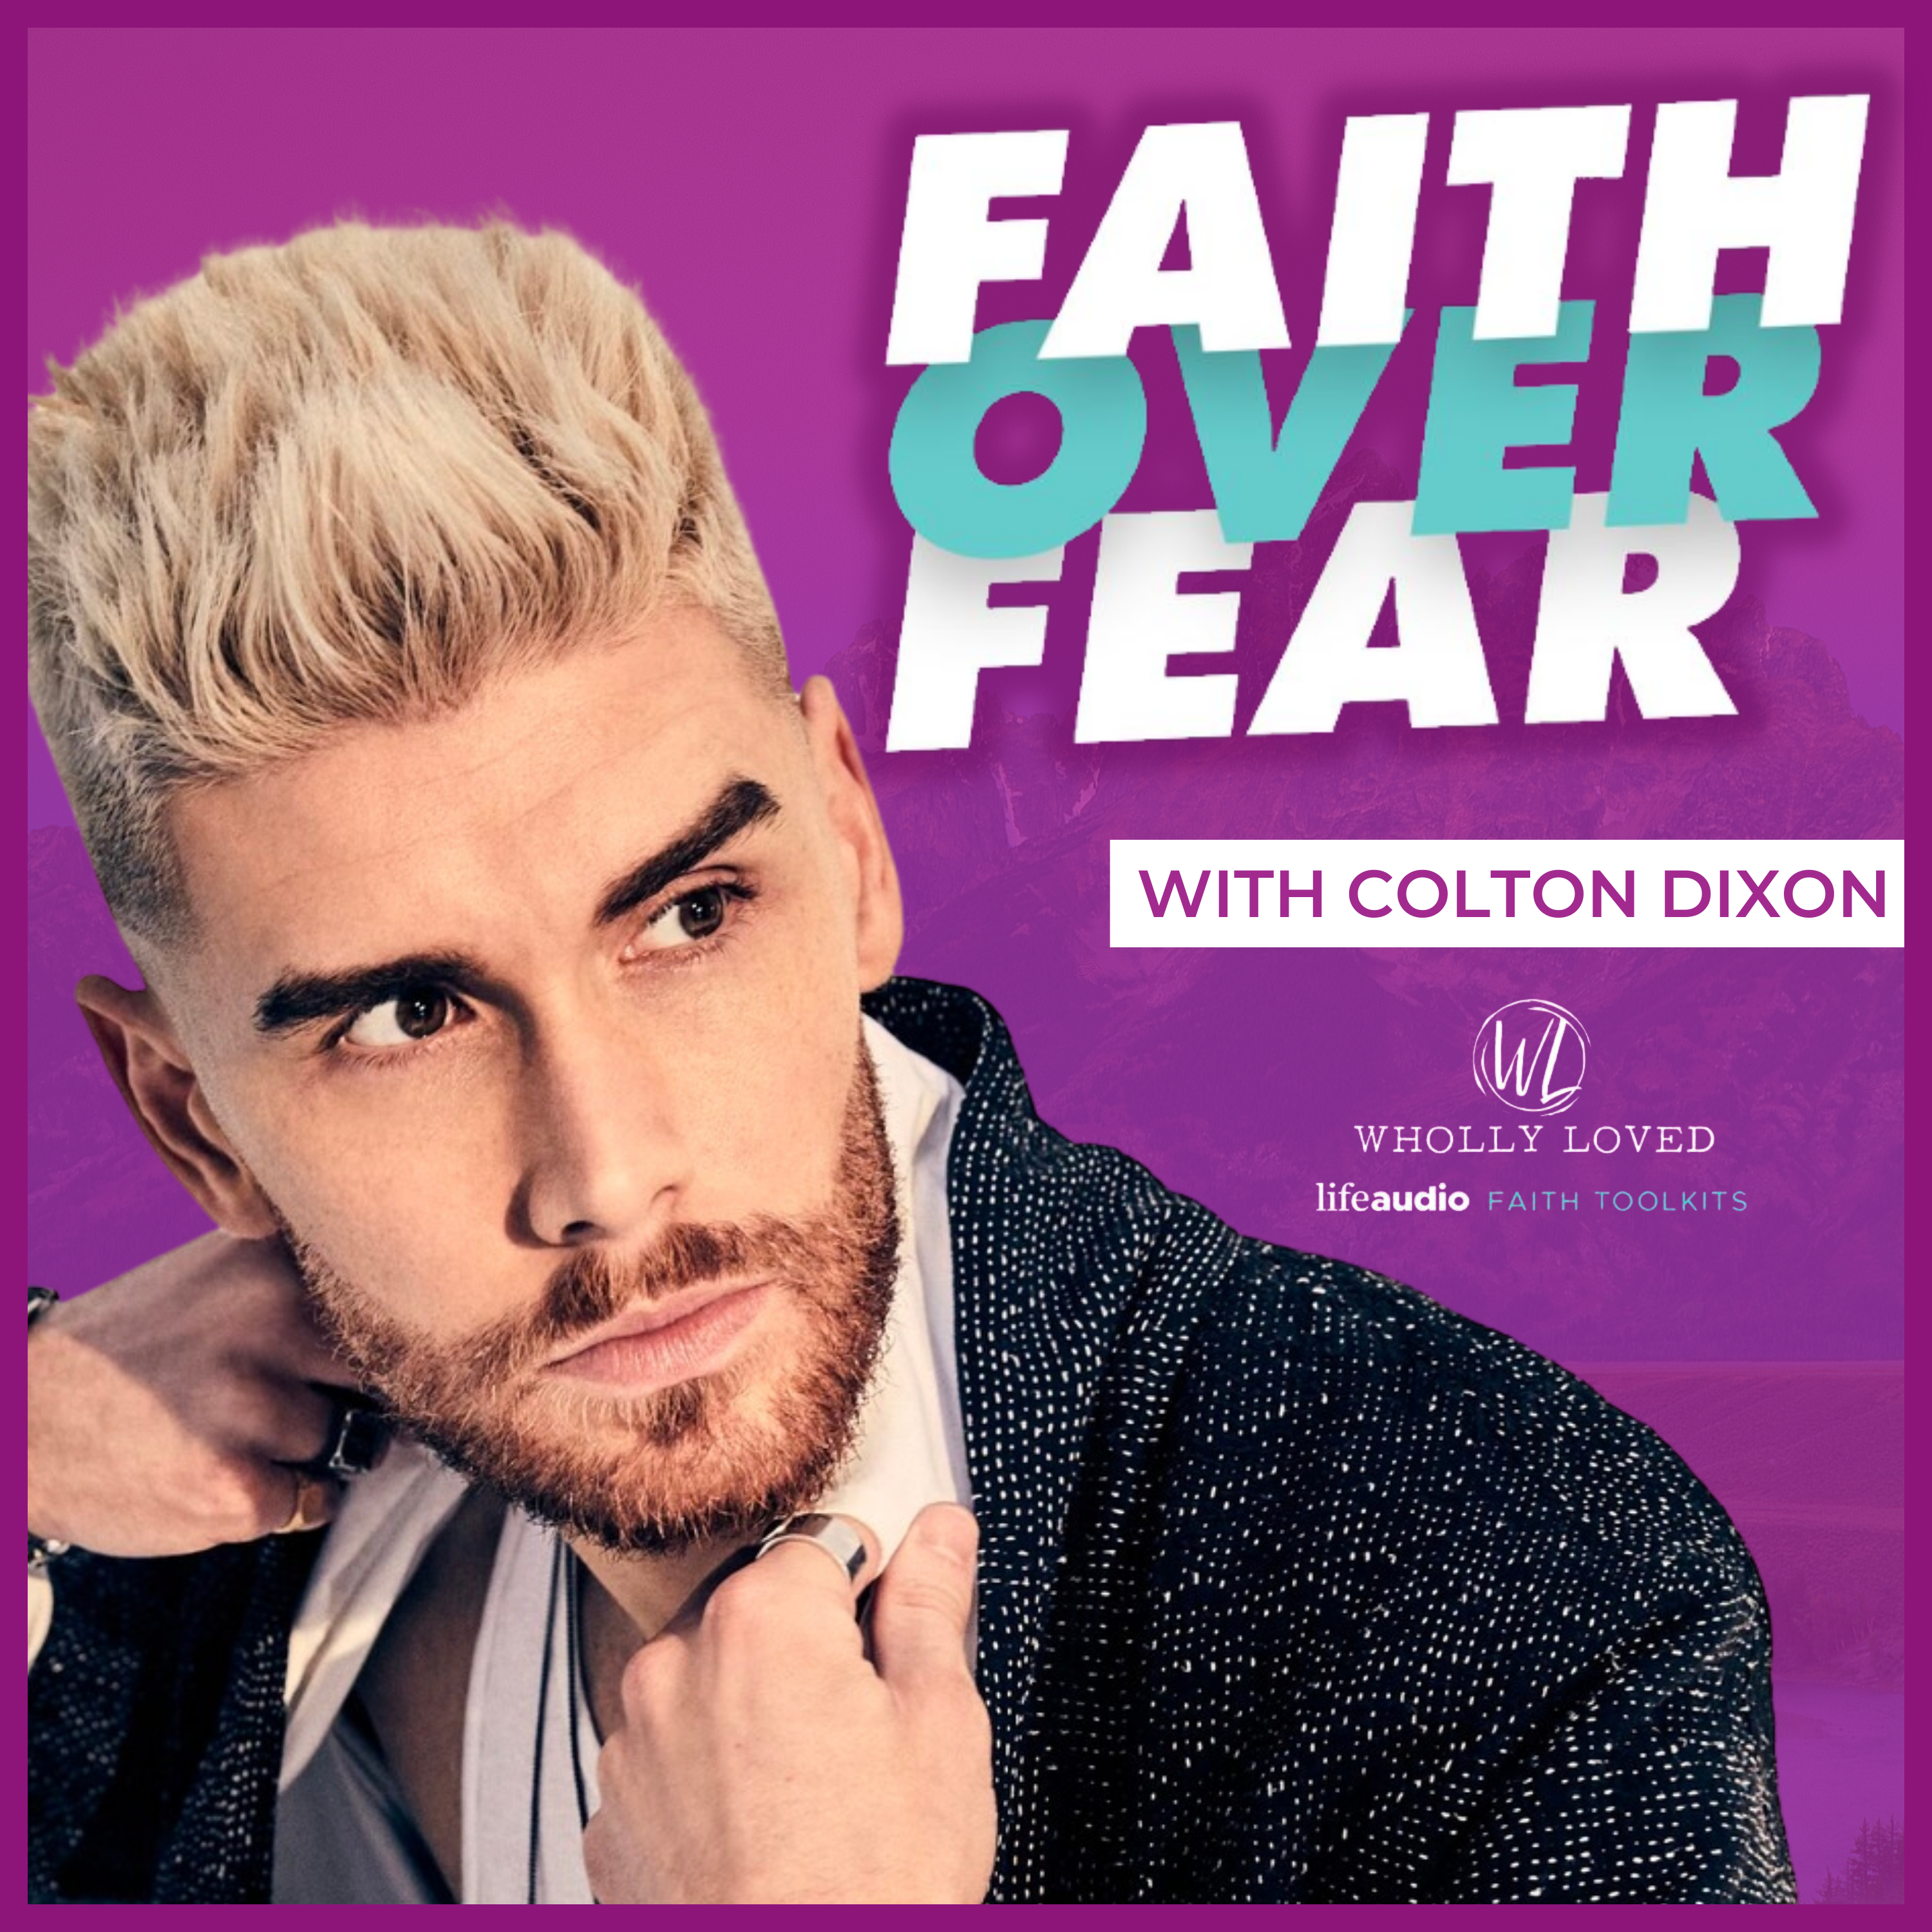 Fighting Fear by Holding onto God's Light with Colton Dixon